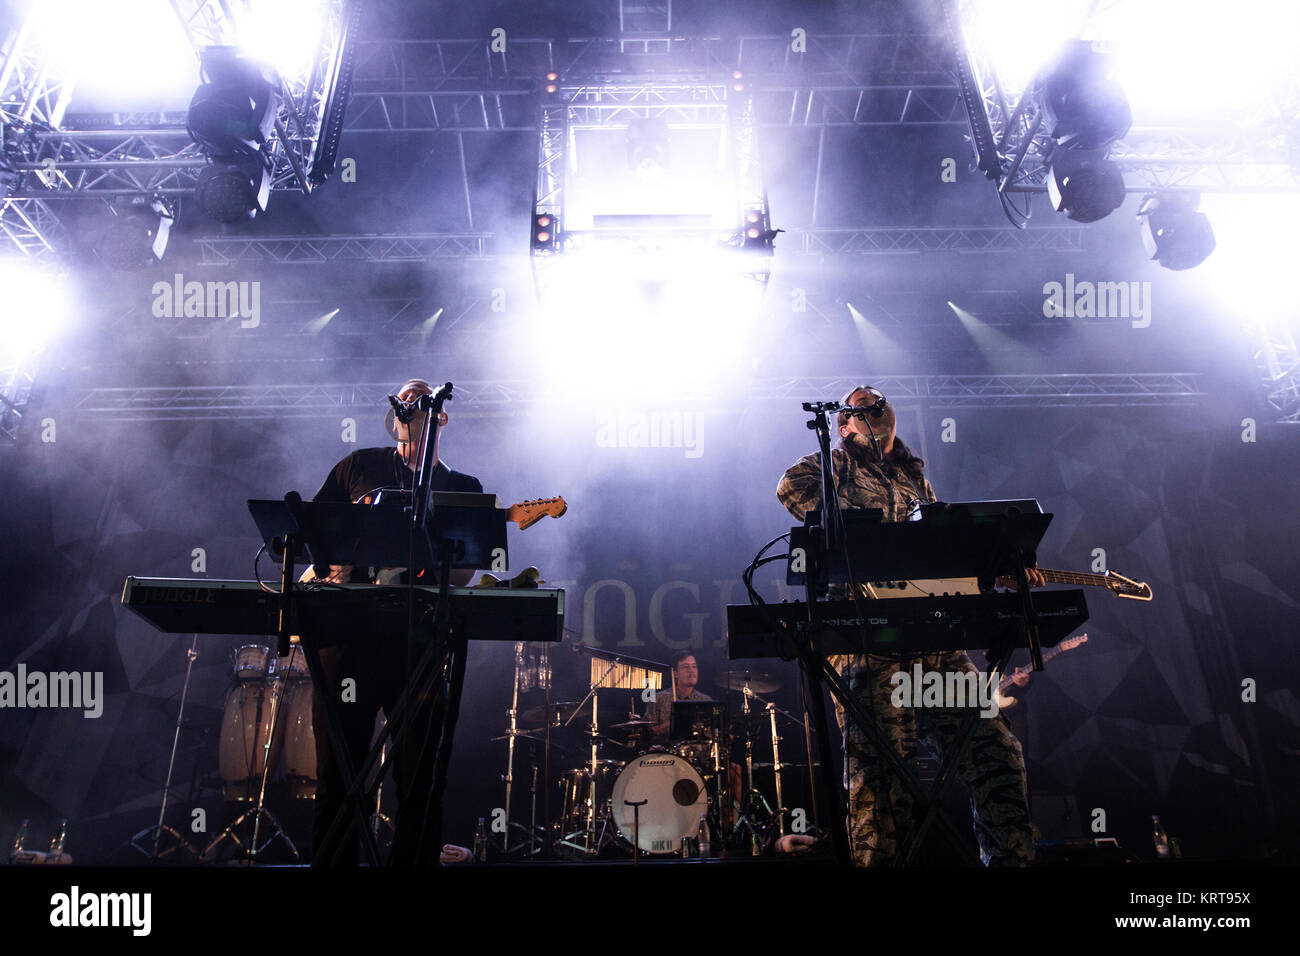 The British band and music collective Jungle performs a live concert at Avelon Stage at at Danish music festival Roskilde Festival 2015. Here singers and musicians Tom McFarland (L) and Josh Lloyd-Watson (R) are pictured live on stage. Denmark, 02/07 2015. Stock Photo